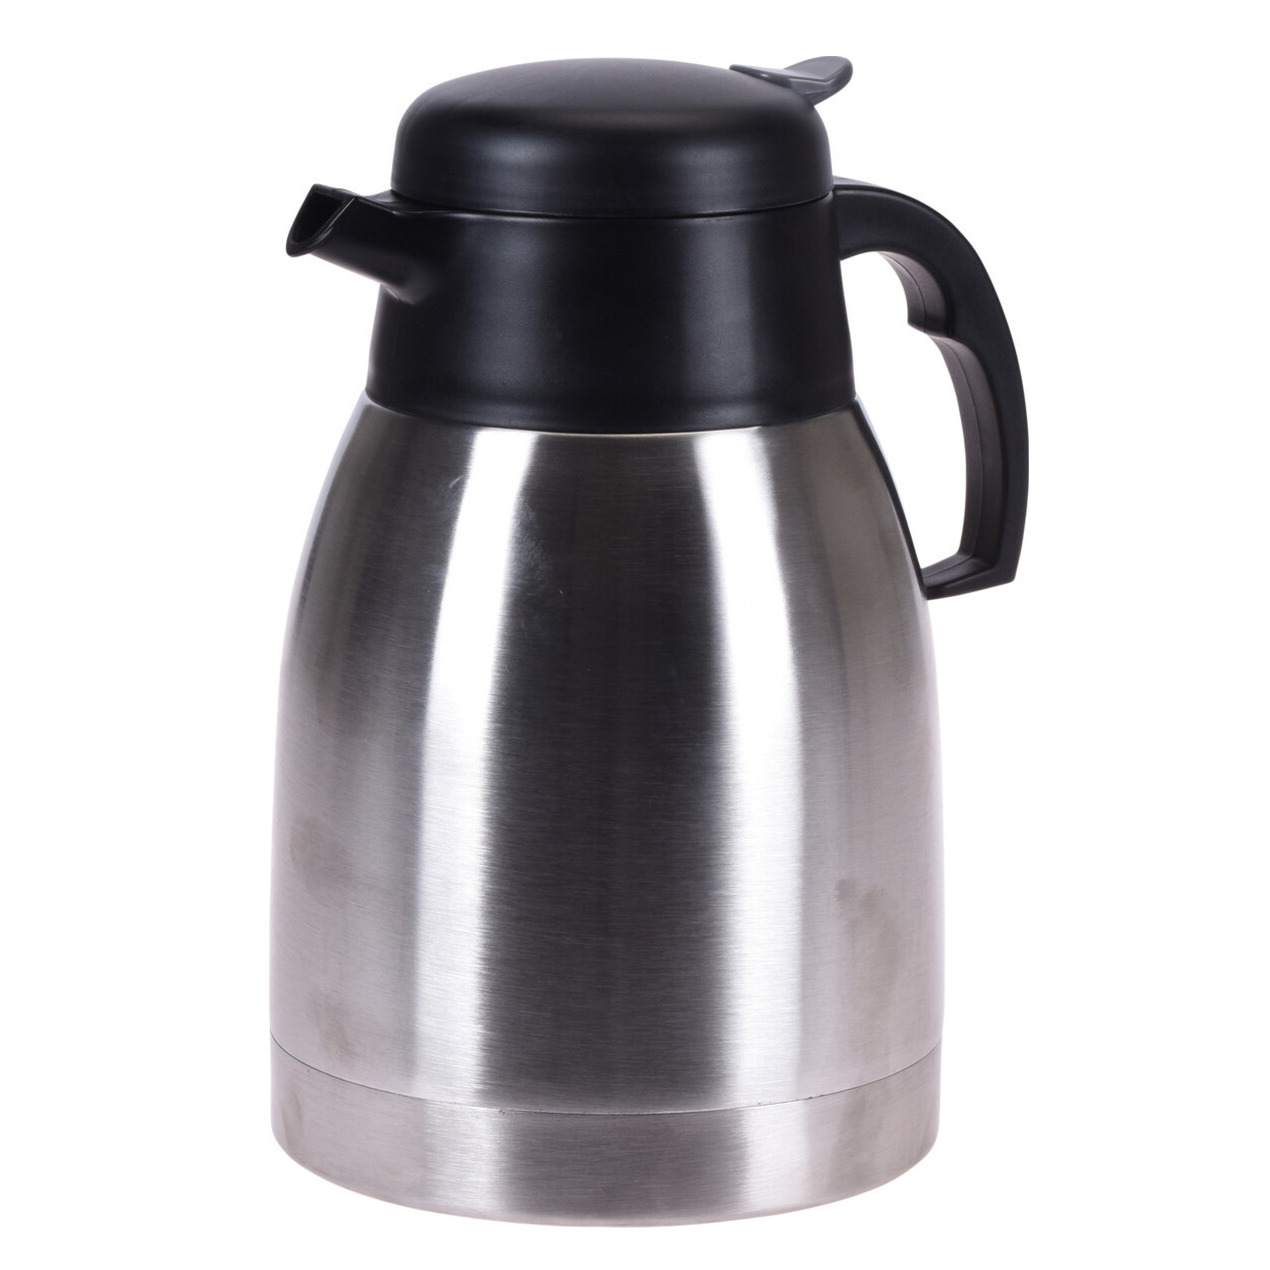 1x Koffie/thee thermoskan RVS 1500 ml